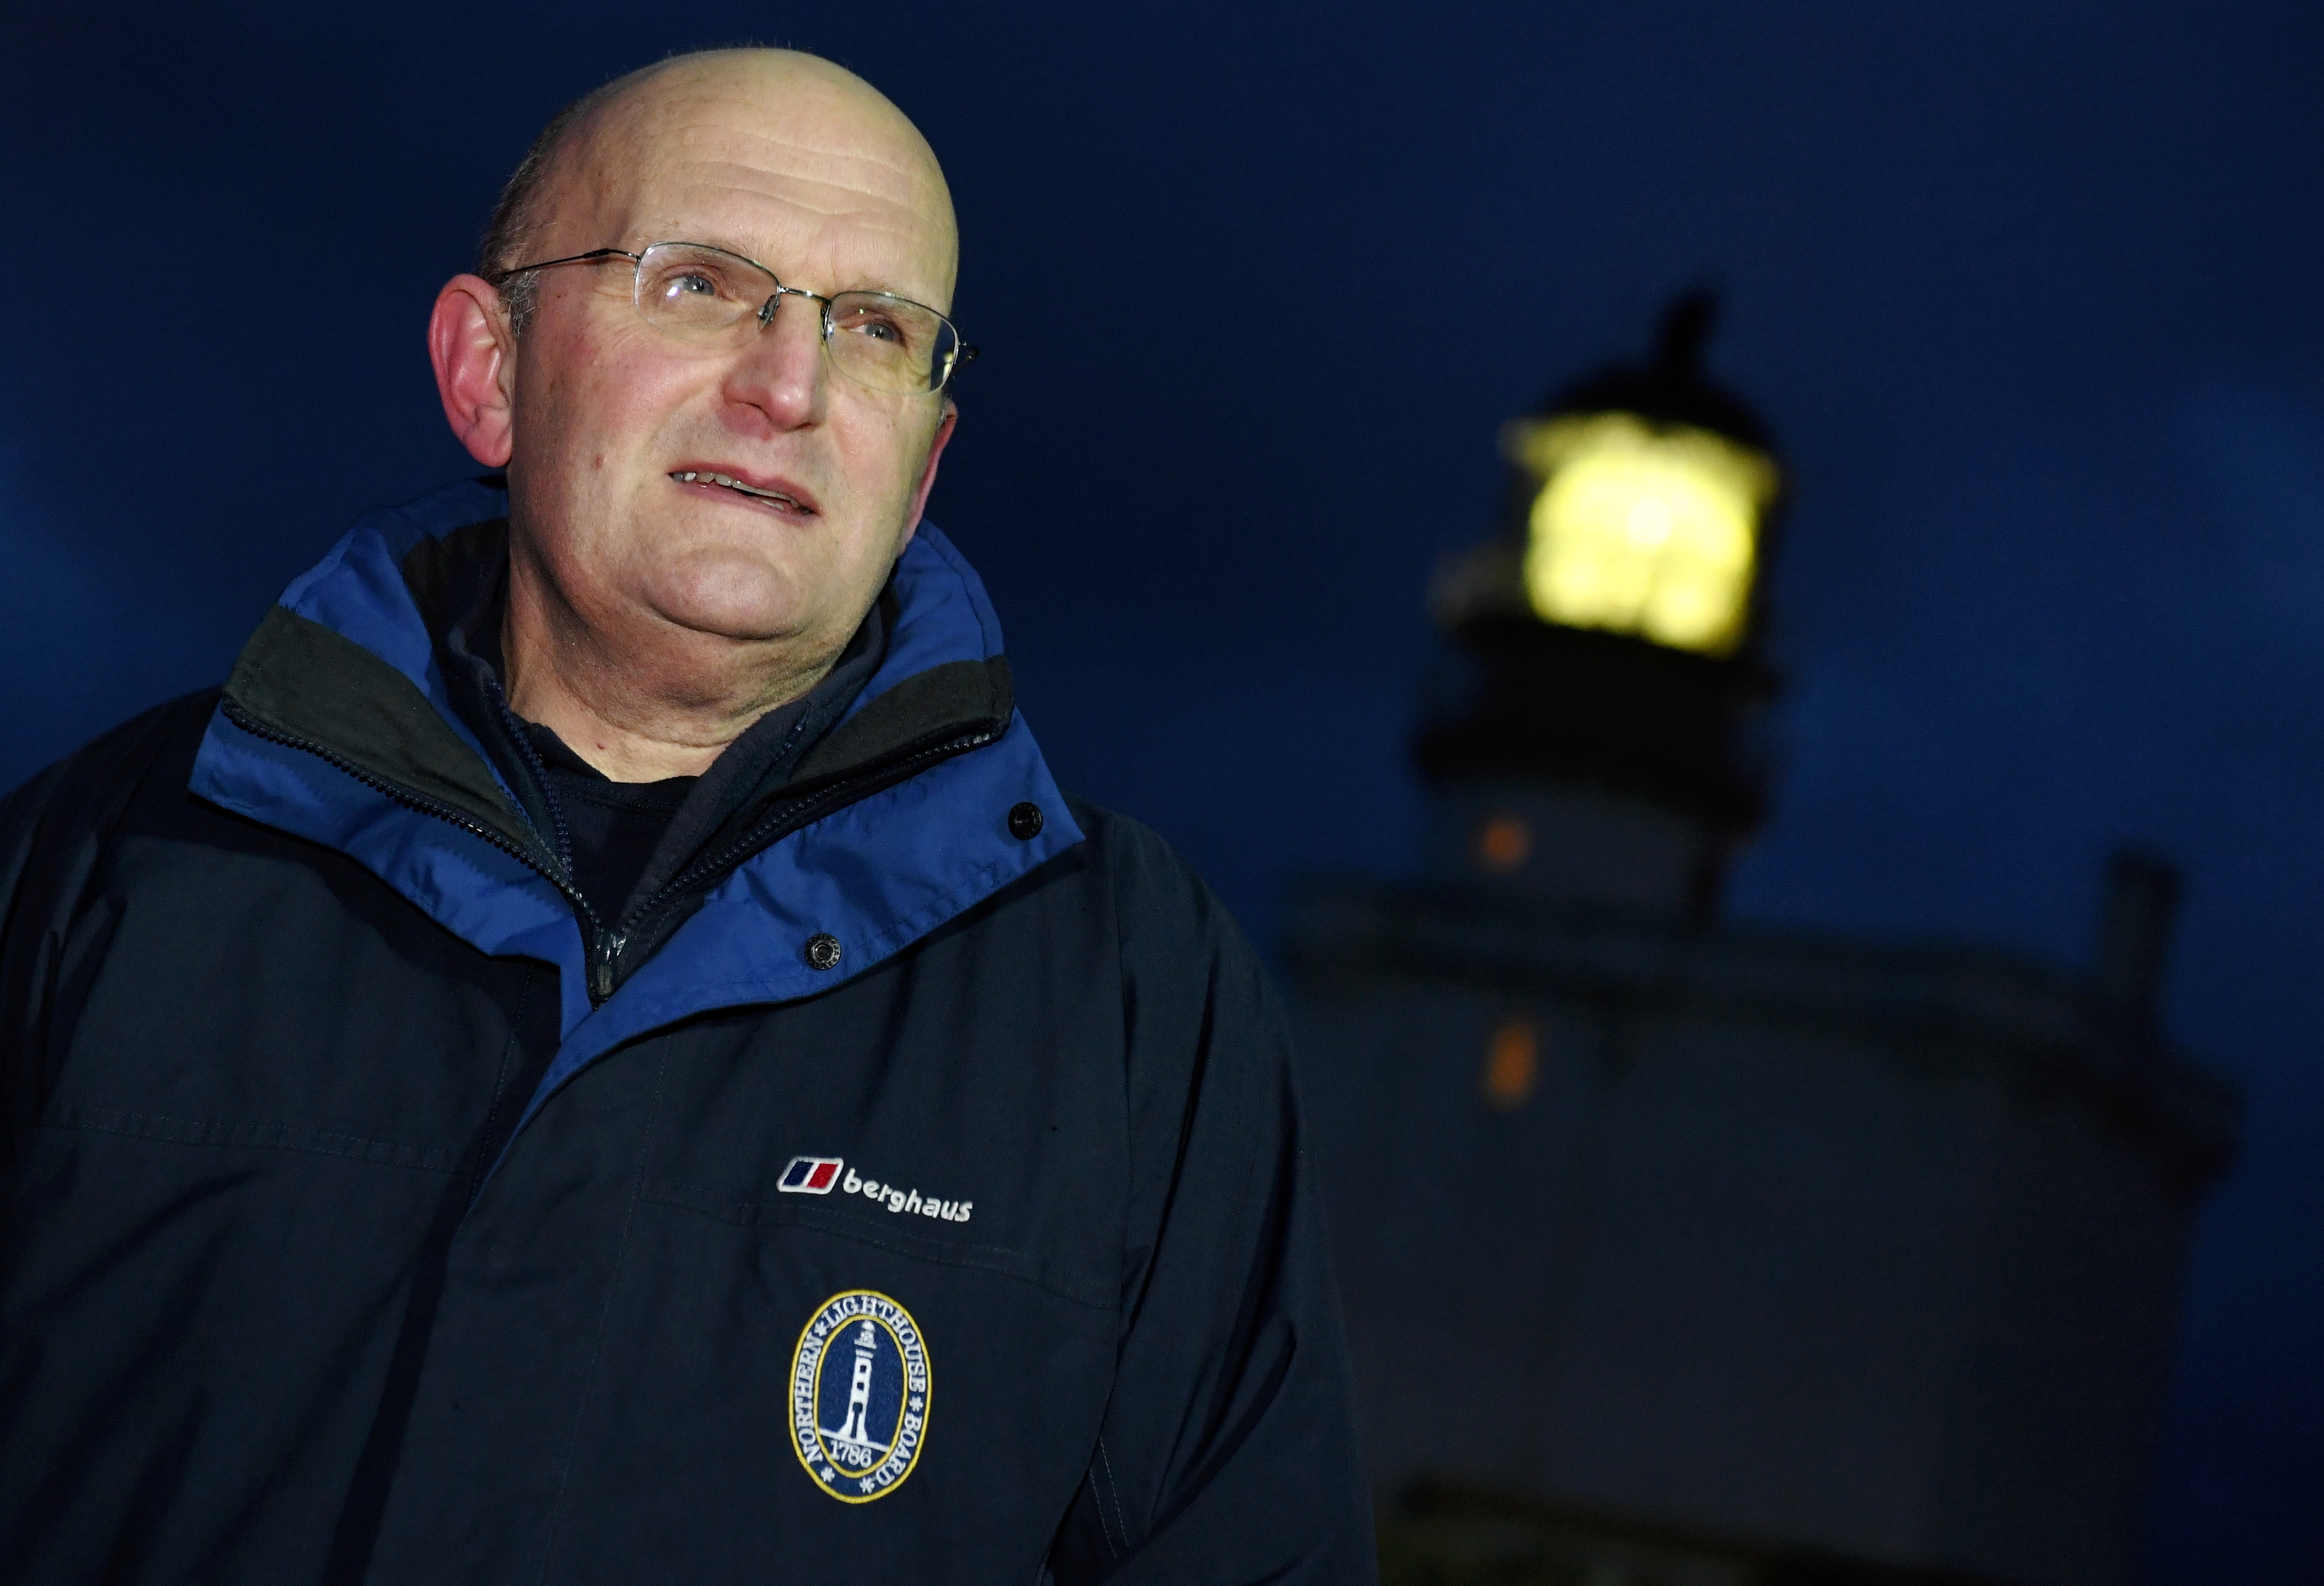 CEO of the Northern Lighthouse Board Mike Bullock who switched the light off after 24 hours.